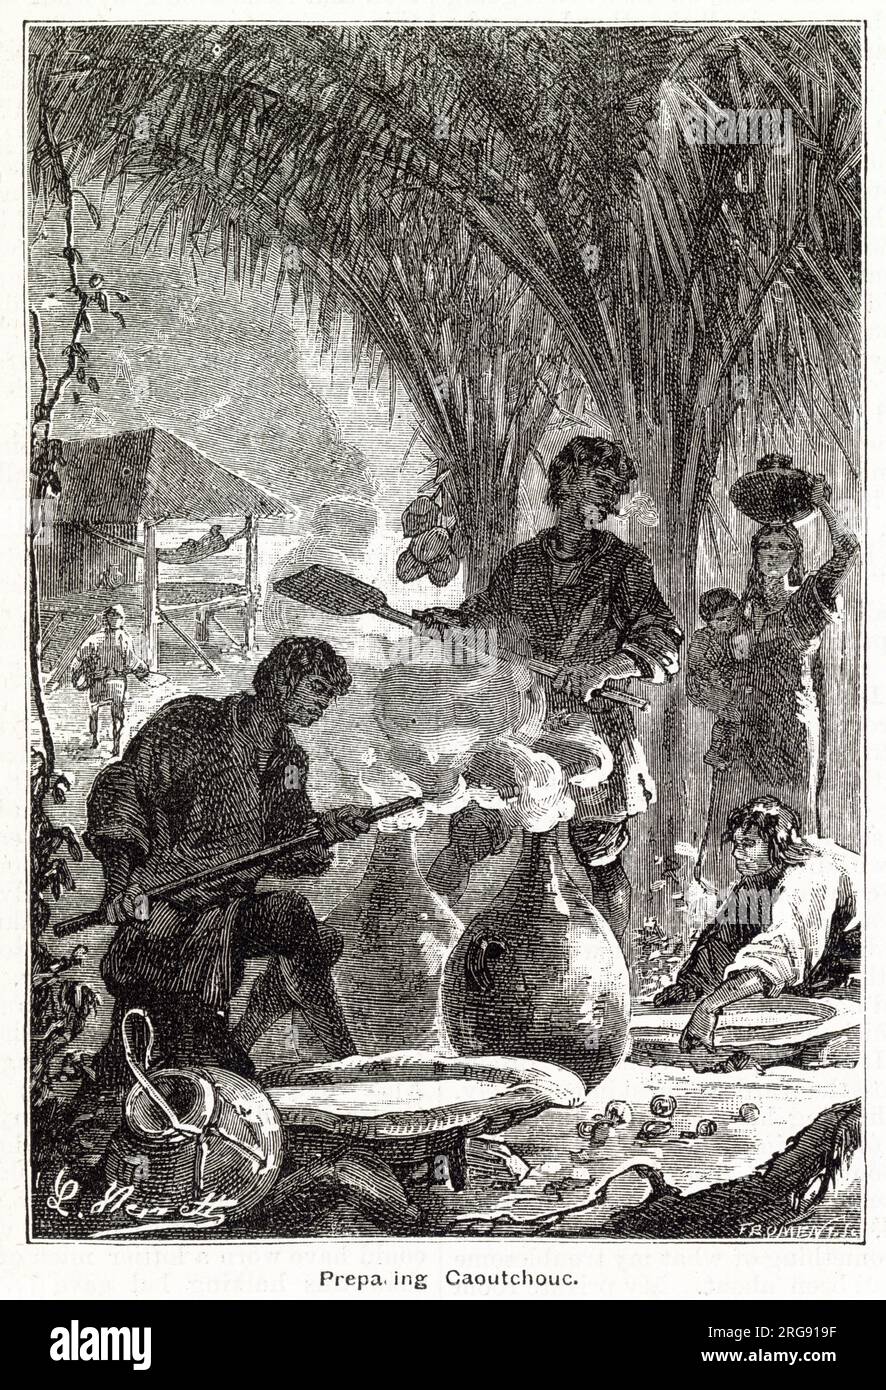 Preparing Caoutchouc, a natural rubber produced in Amazon region. From the beginning of the second half of the 19th century, rubber was desirable commodity, valued at a high price, and thought to create wealth and dividends. Stock Photo